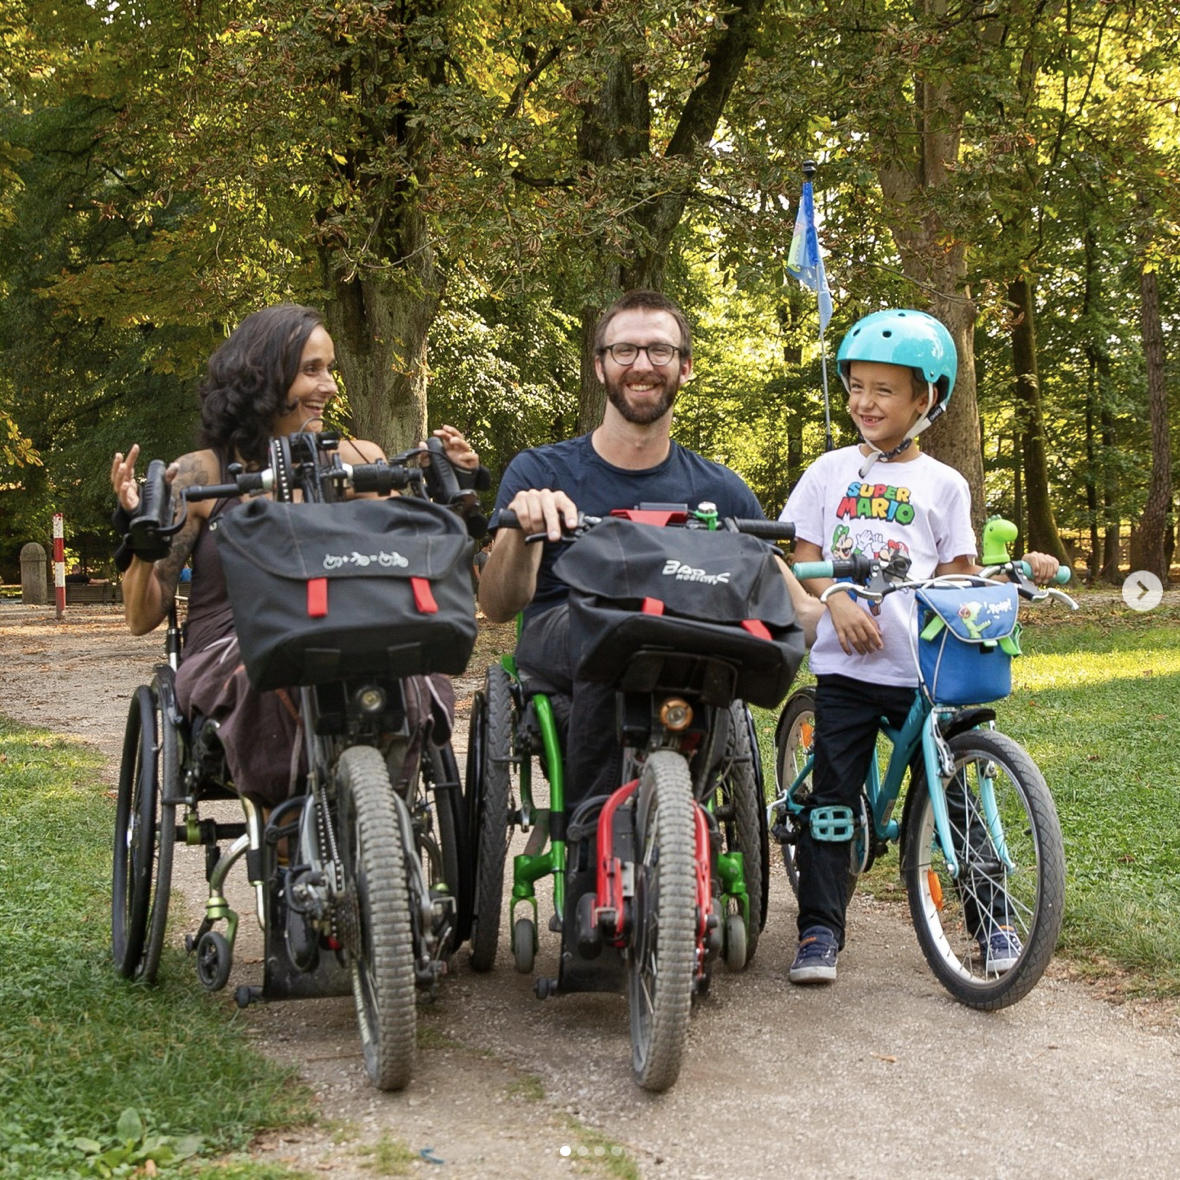 two adults and a child outdoors at a park with trees and dirt trail. Both the woman and the man are using wheelchairs that have an electric handbike attached and a large black bag on the front of each handbike. The child, is using a bike with a blue triangular flag on the back, and is wearing a blue helmet and a Super Mario t-shirt. They are all smiling. The woman has medium toned skin and shoulder length dark brown wavy hair. The man has lighter skin, short medium brown hair and beard. The child appears to be about 8 to 11 years old.